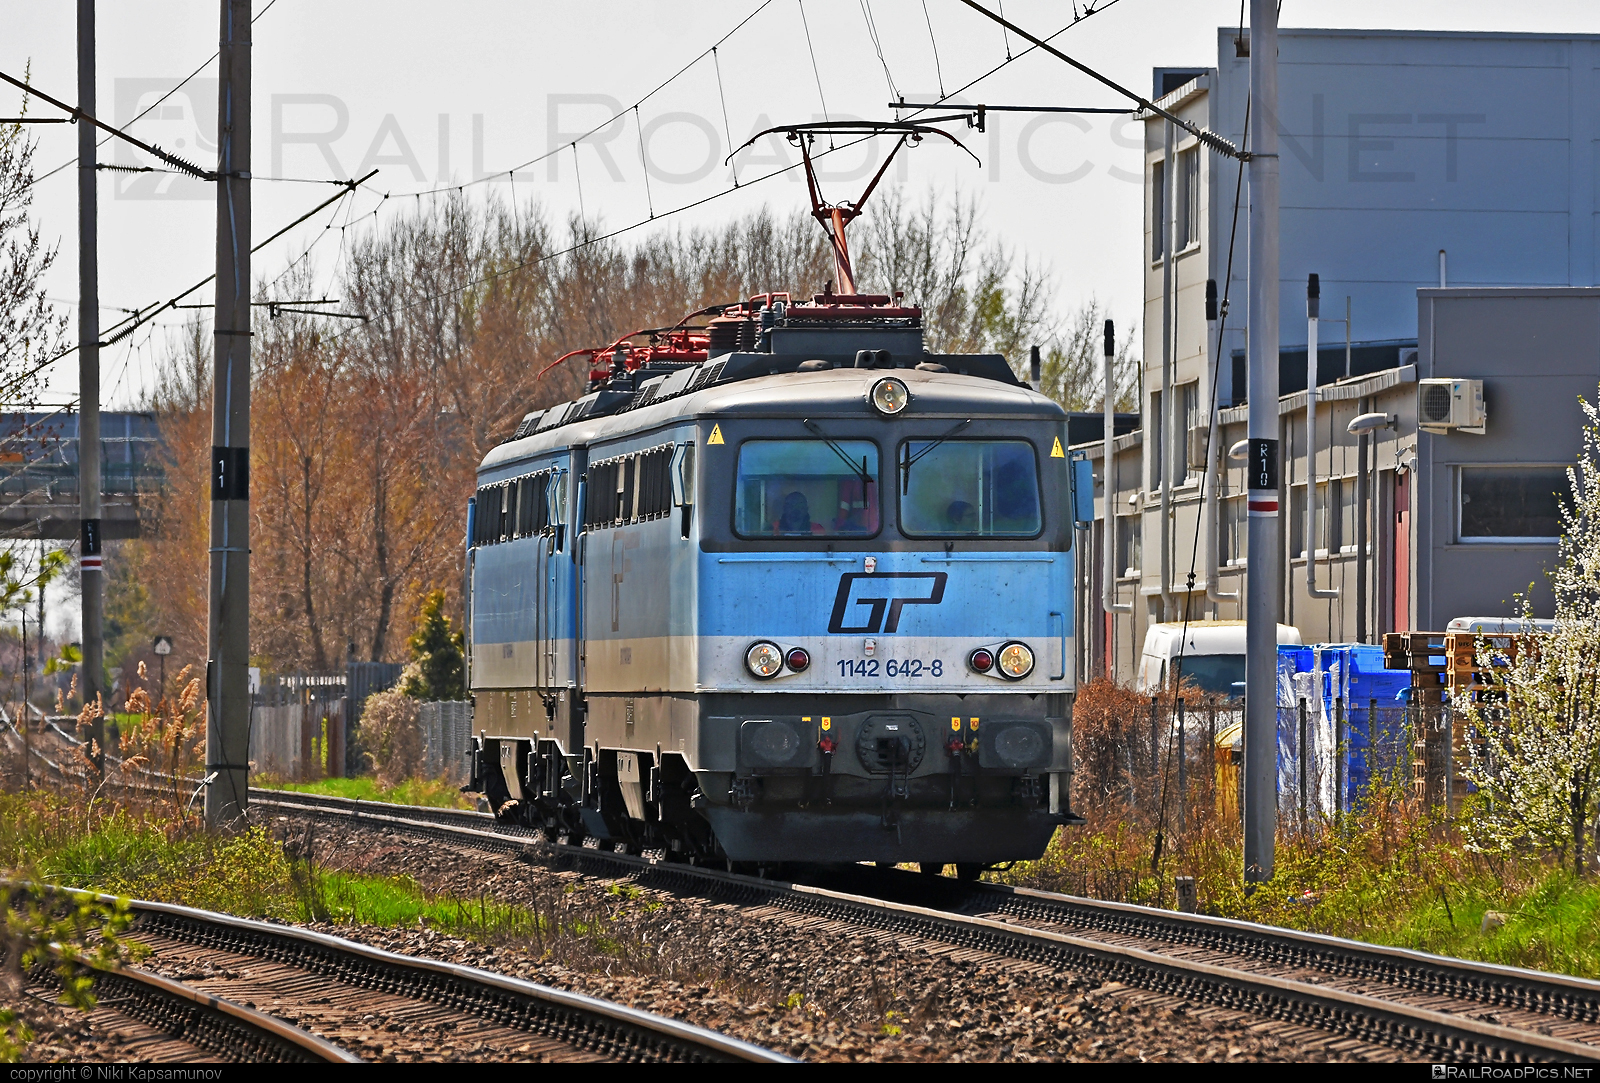 SGP 1142 - 1142 642-8 operated by Grampetcargo Austria #GrampetcargoAustria #gca #grampetcargo #obb1142 #obbClass1142 #sgp #sgp1142 #simmeringgrazpauker